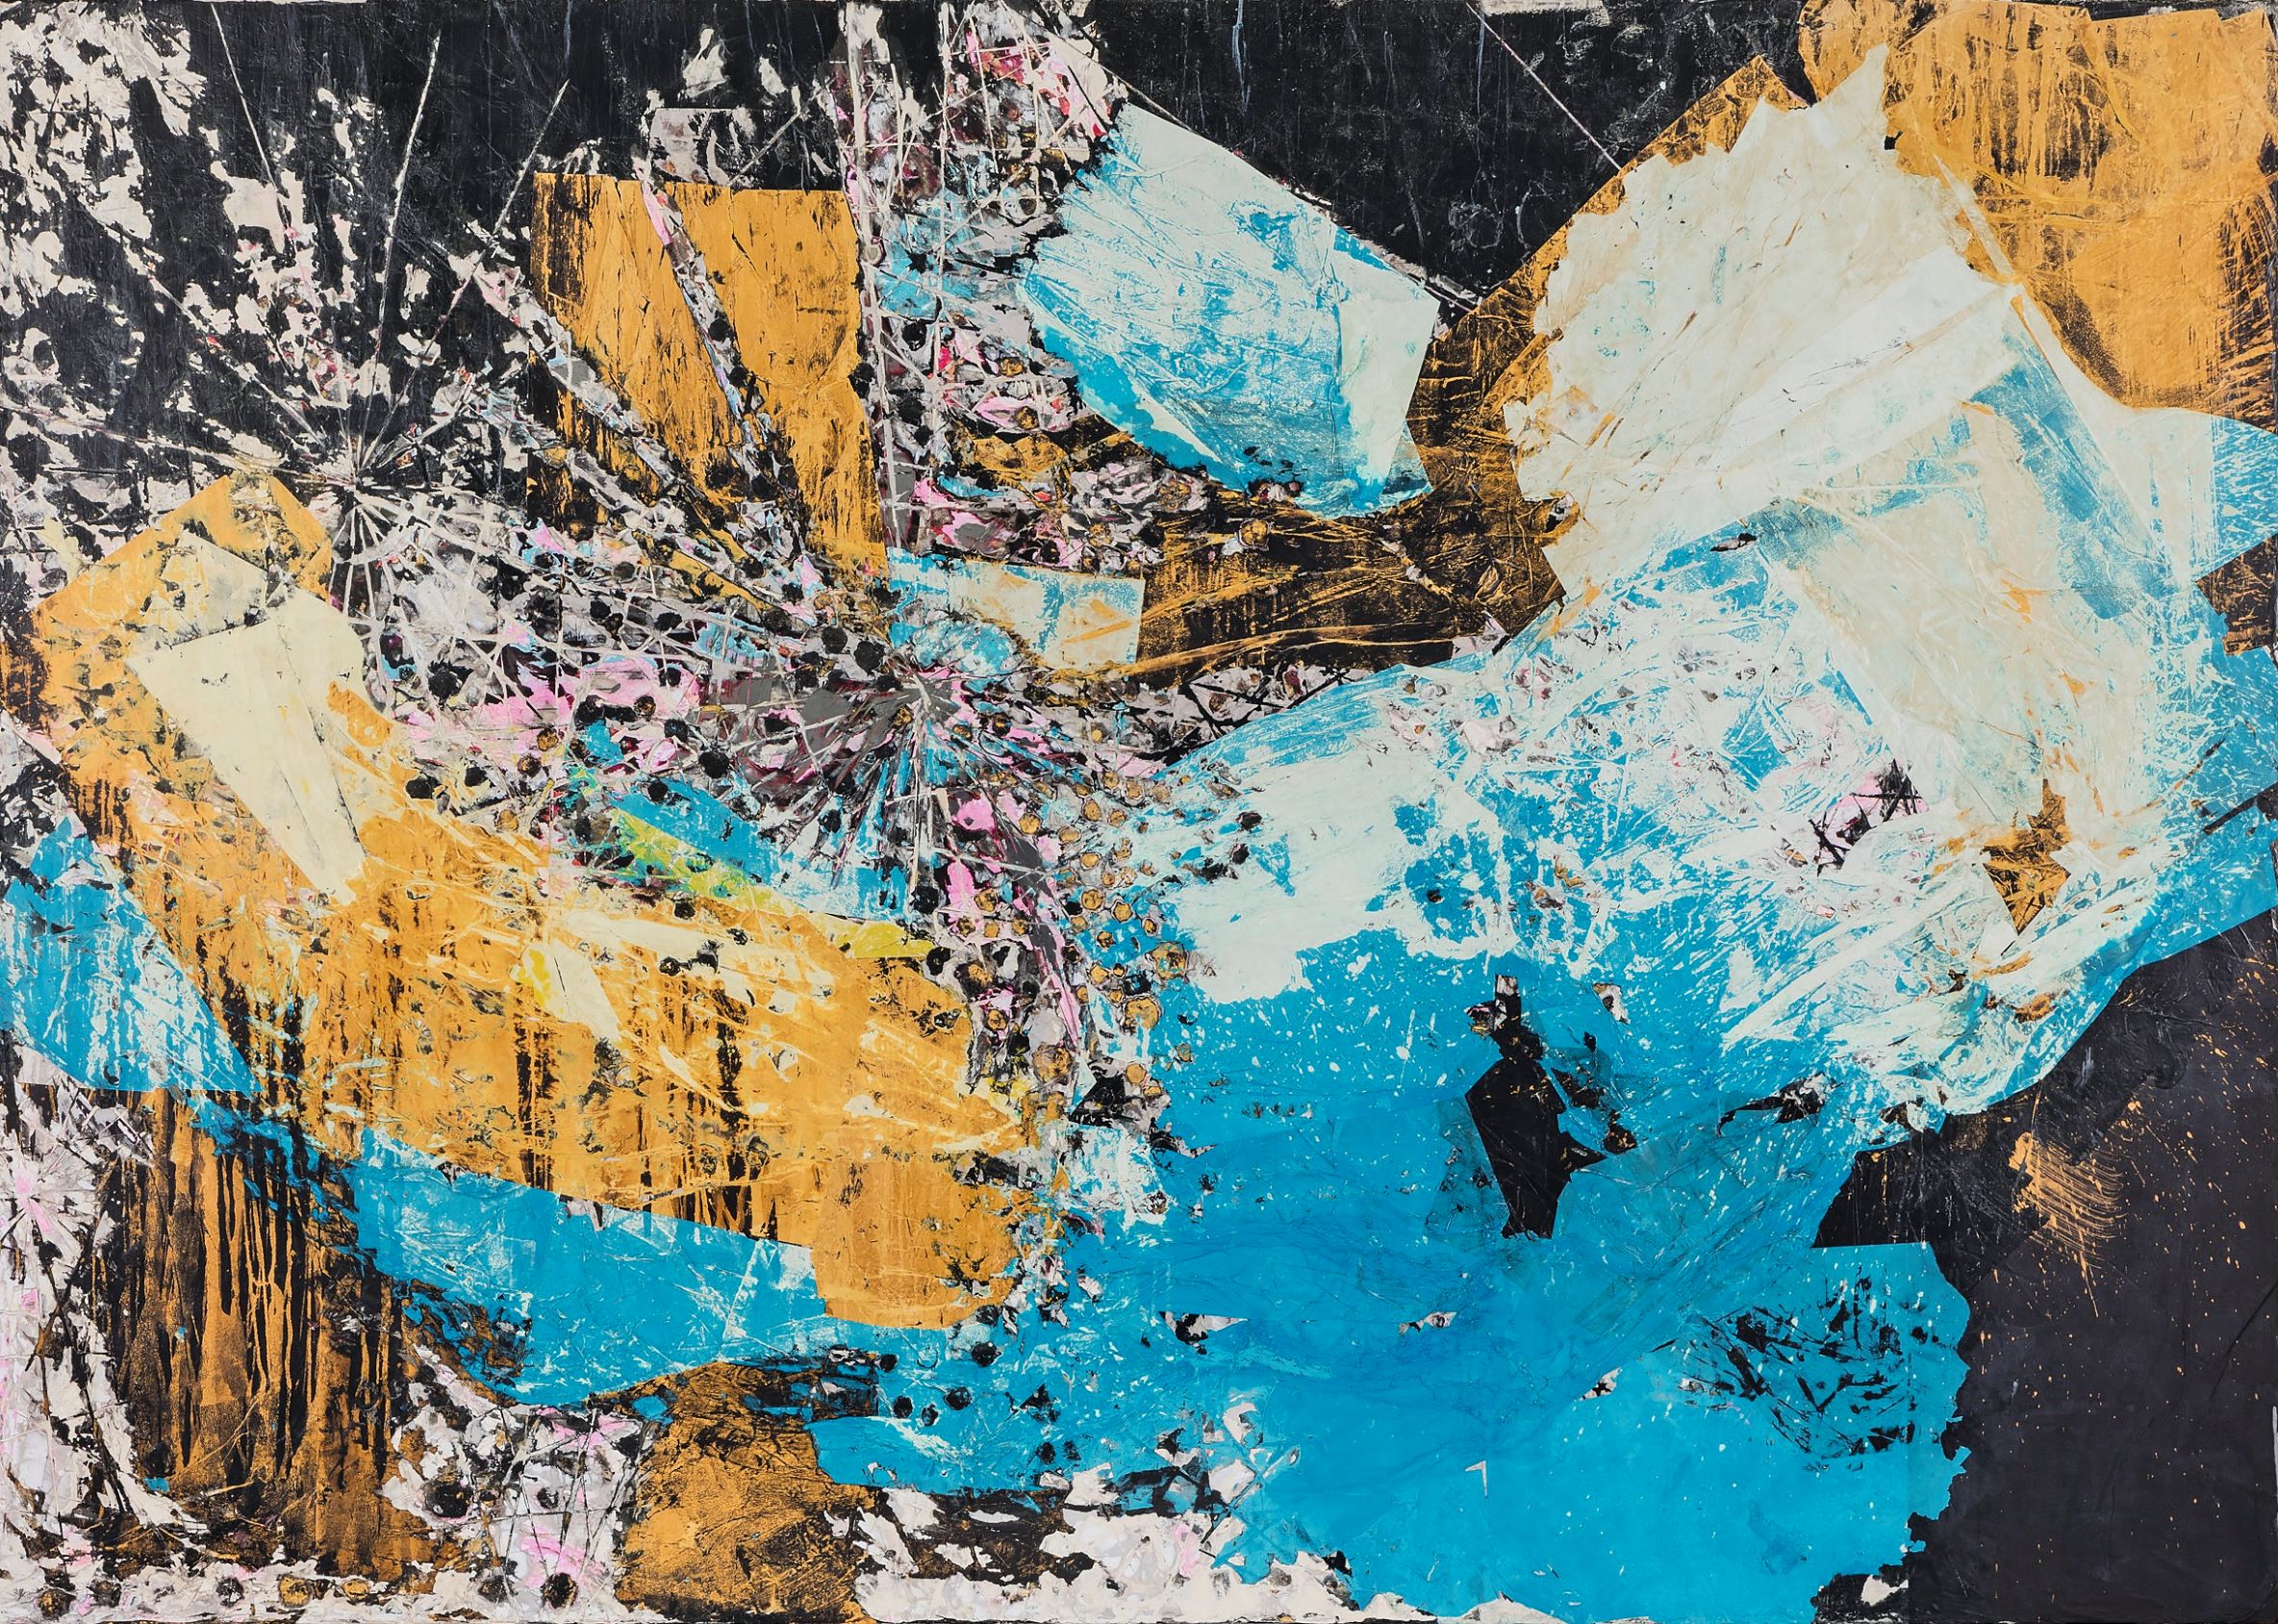 Mark Bradford, Let’s Walk to the Middle of the Ocean, 2015, mixed media on canvas, 260 x 3